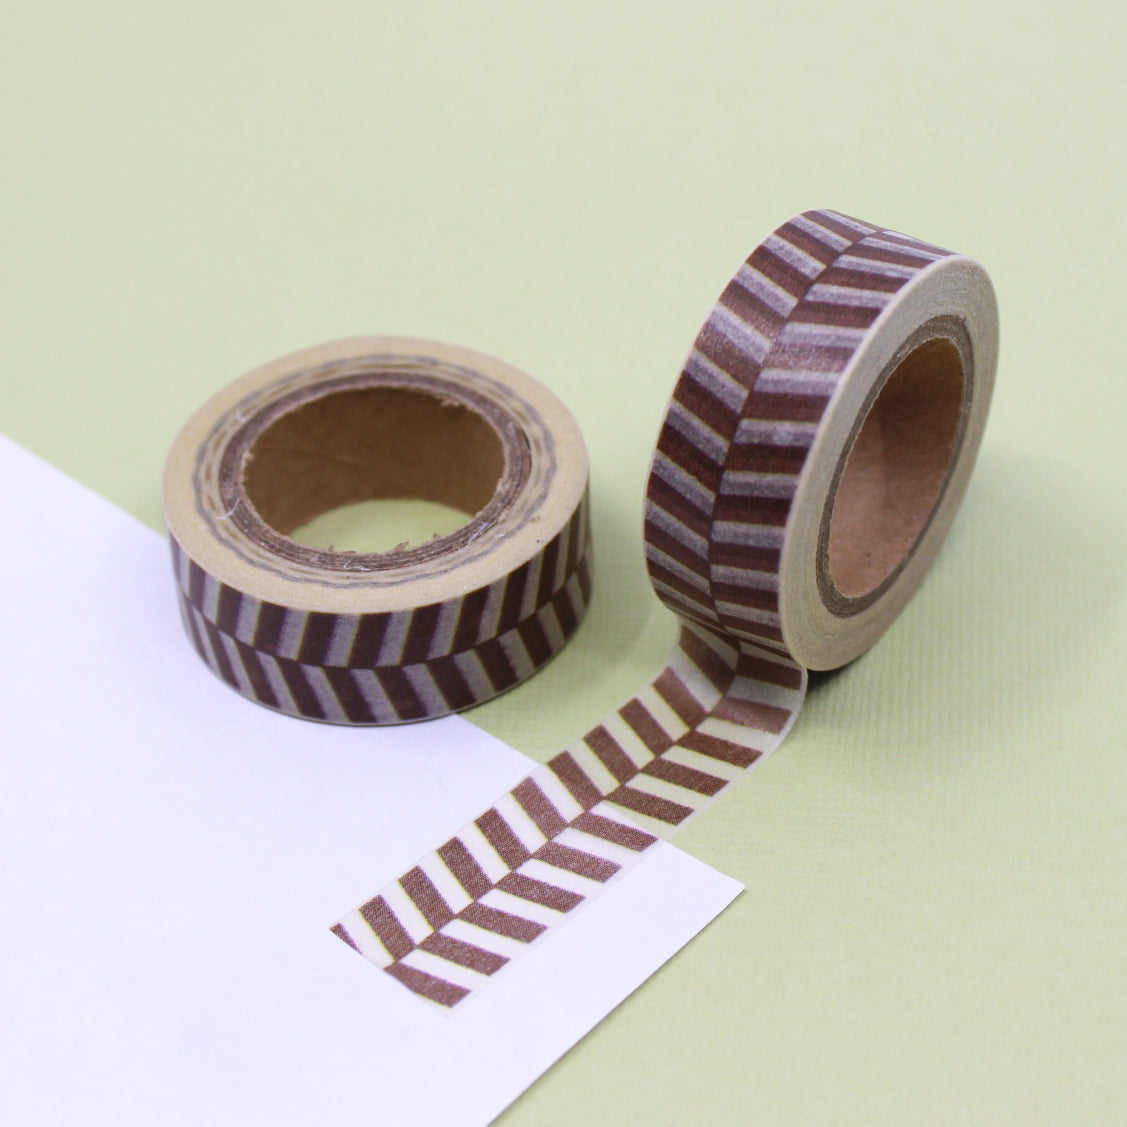 This fun and unique chevron pattern resembles a zipper. It will make a super cute addition to your washi collection. We sell this style of chevron tape in Yellow, brown and grey in our shop. This tape is sold at BBB Supplies Craft Shop. 